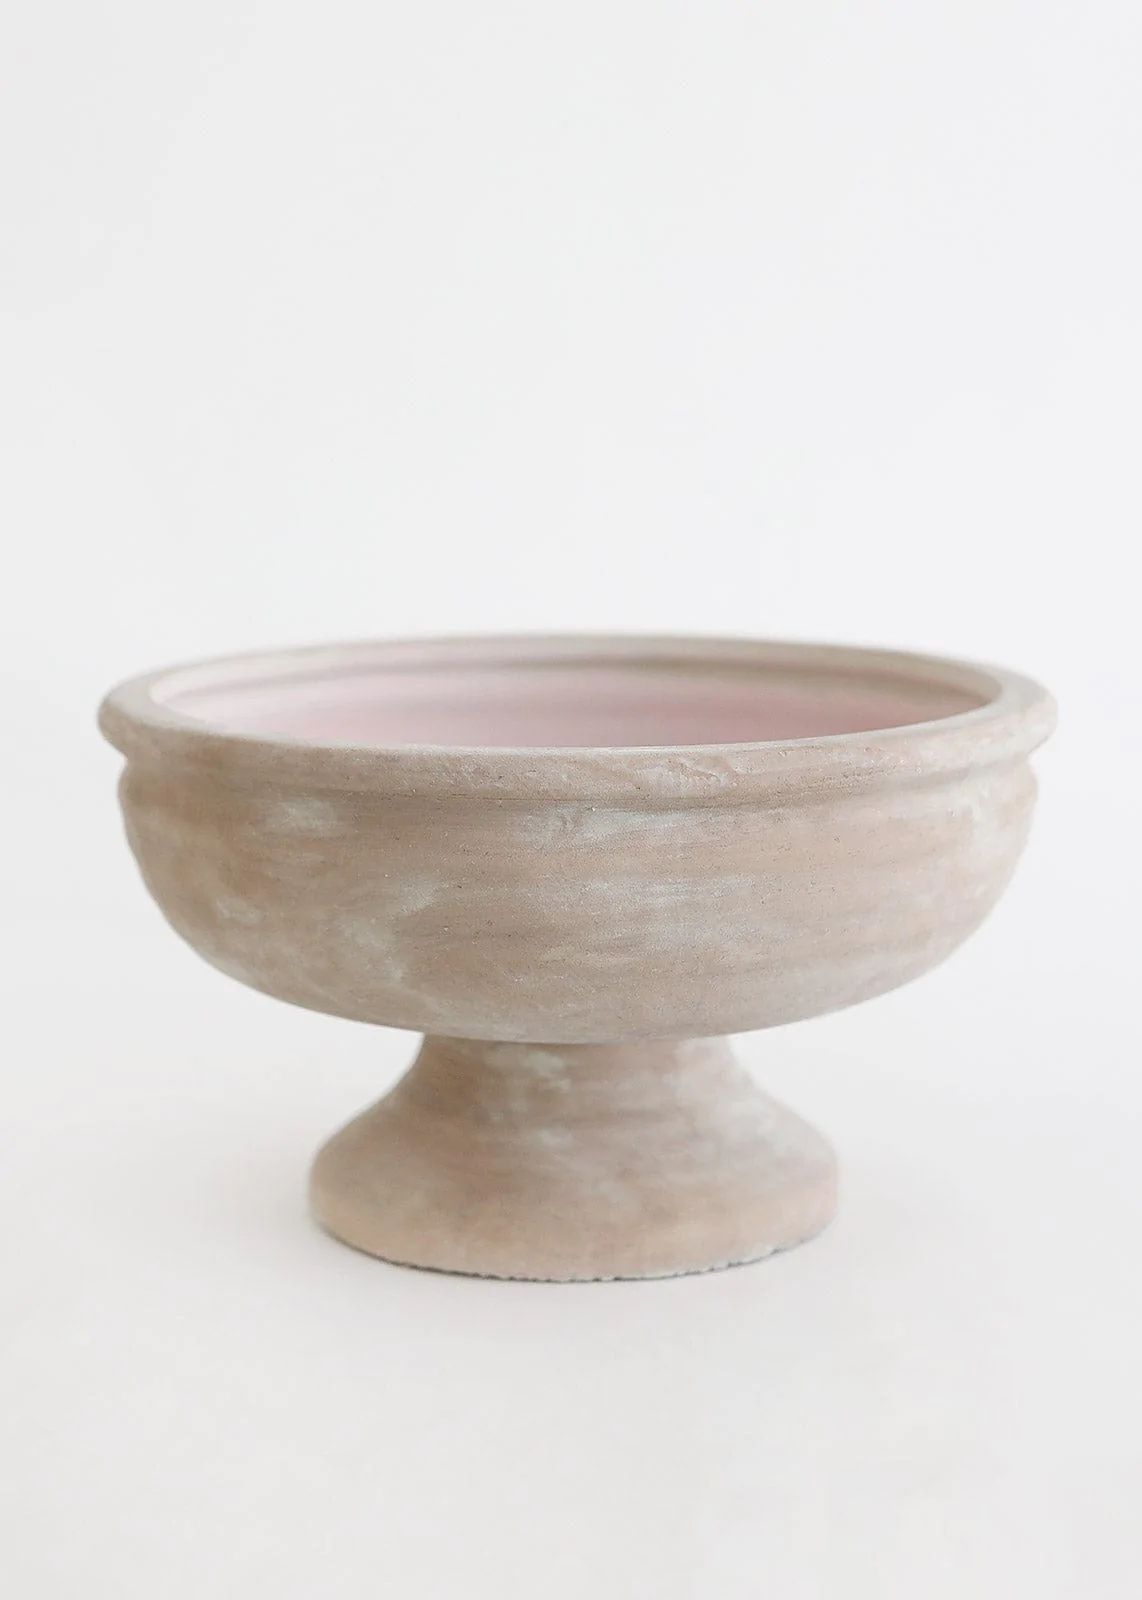 Whitewashed Sand Compote Bowl | Bohemian Wedding Ideas | Afloral.com | Afloral